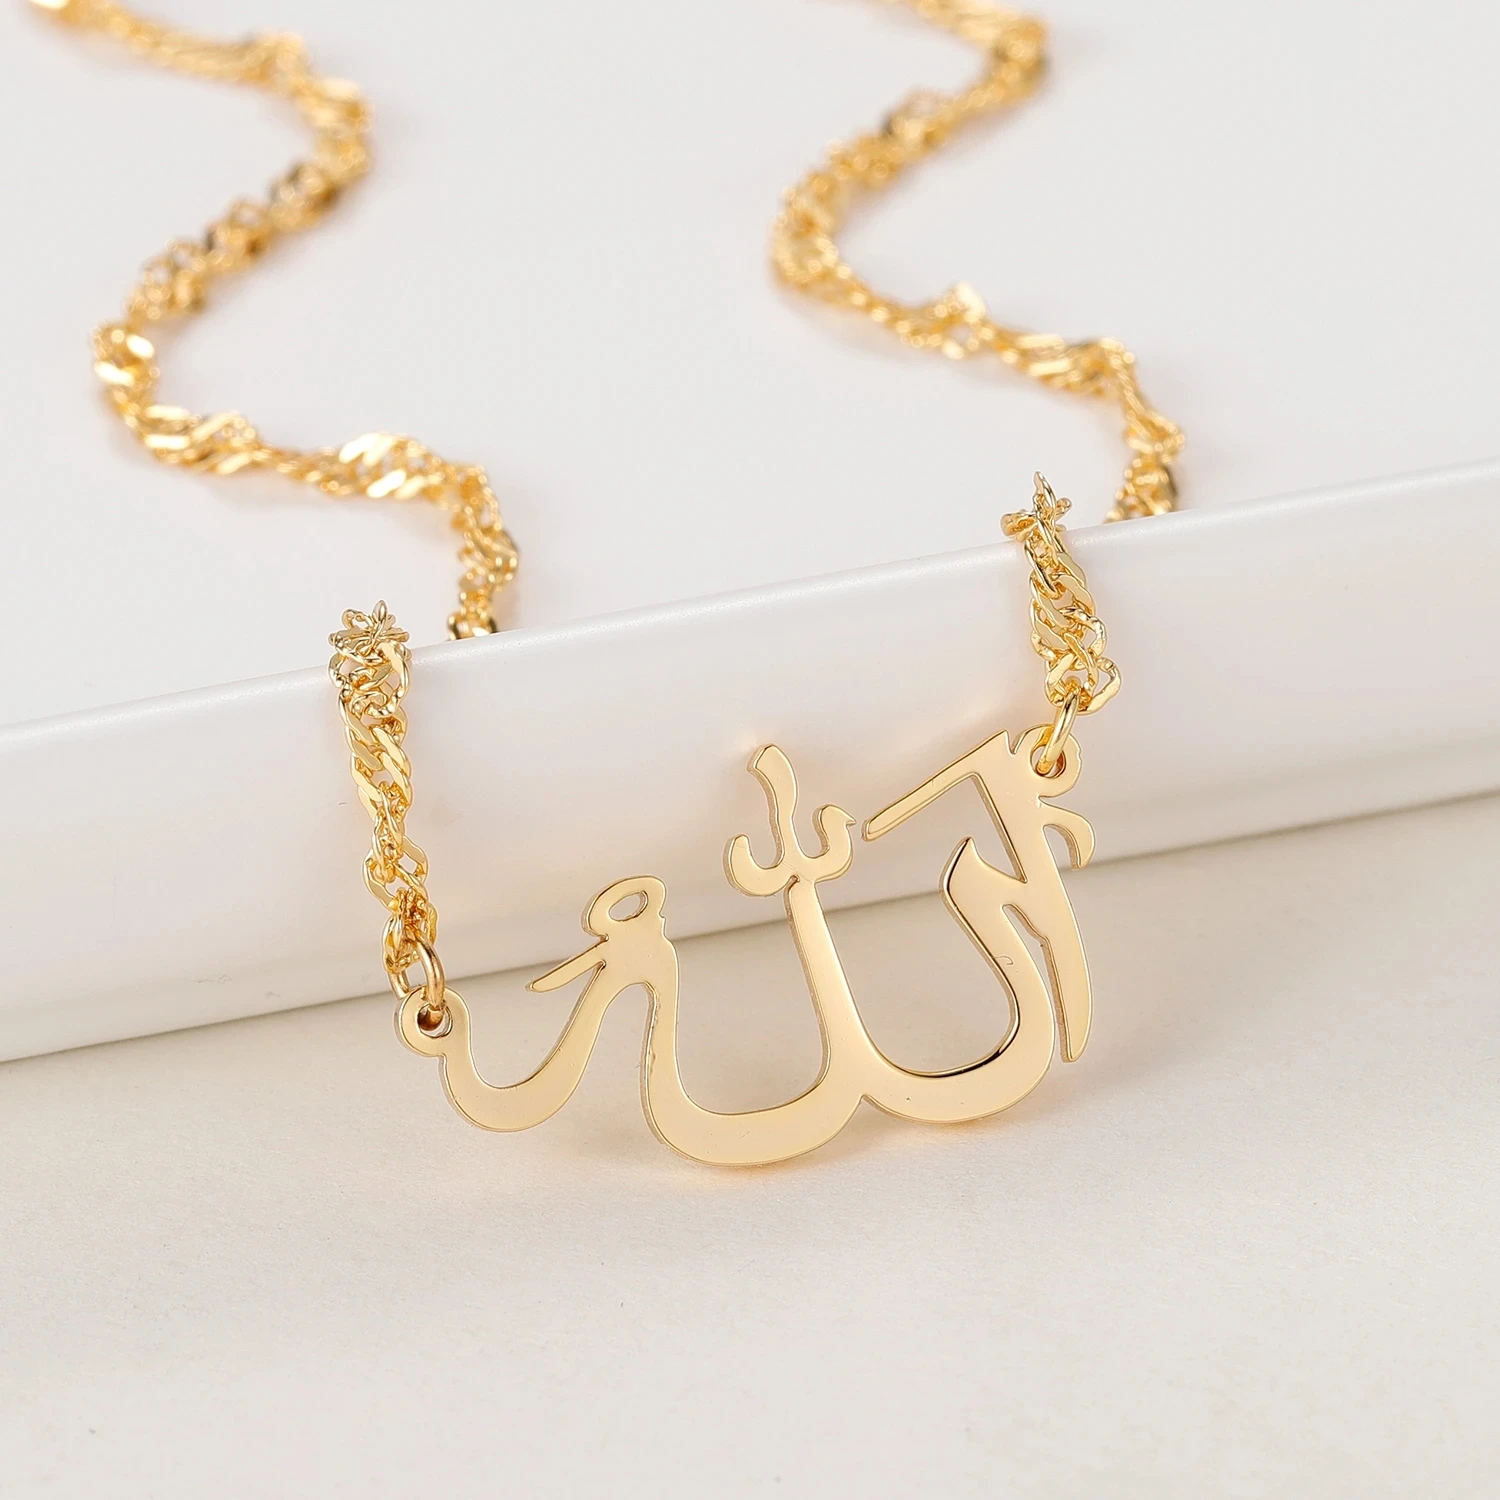 Custom Name Arabic Calligraphy Necklace Stainless Steel Pendants Islam Muslim Religious Jewelry For Women Mother's Day Gifts ayatul kursi necklace muslim stainless steel jewelry personalized iced out pendants islam arabic god messager gift jewelry